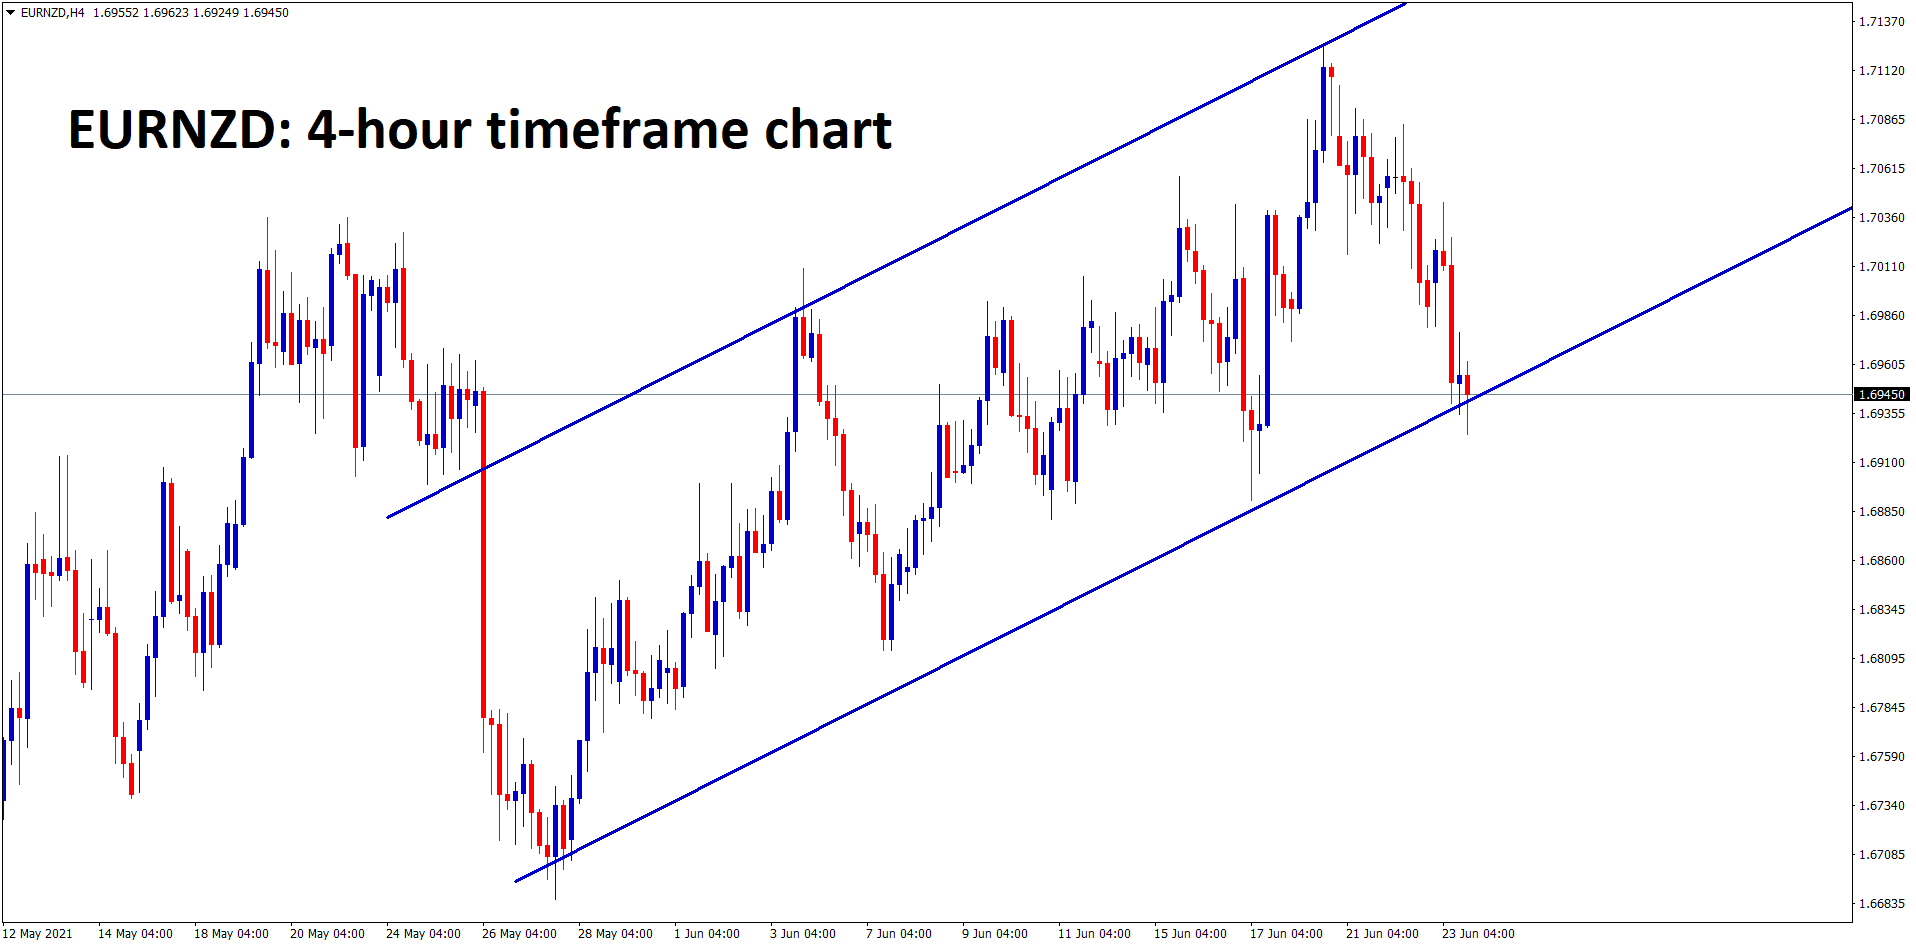 EURNZD is moving in an Ascending channel line.